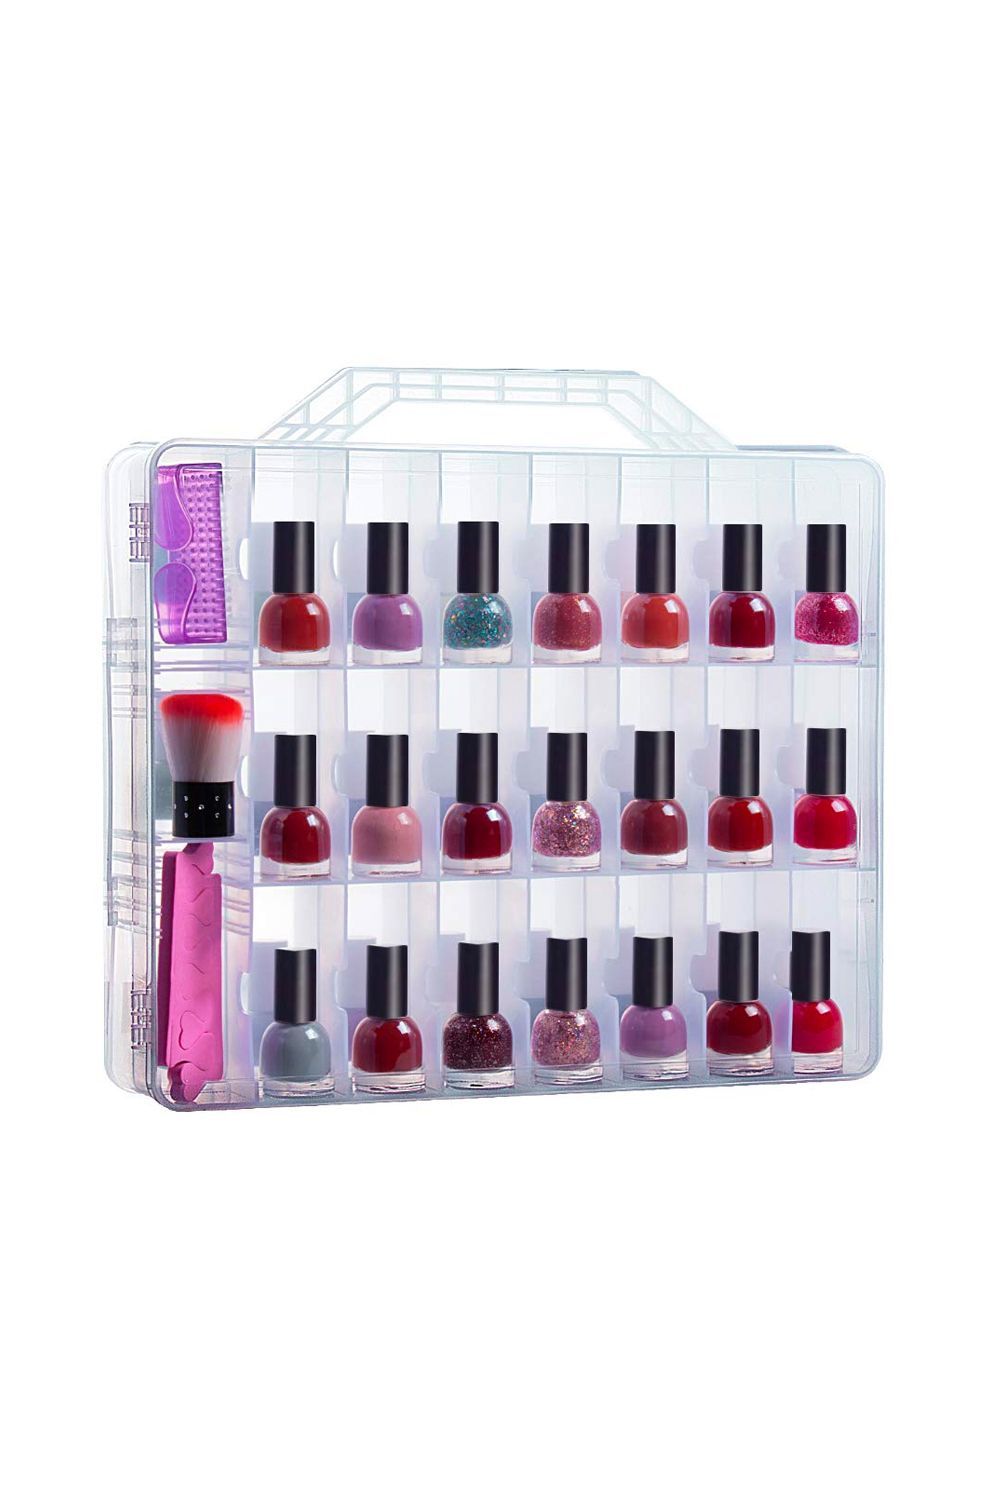 Buy MAKARTT Universal Nail Polish Holder See-Through Counter Case Polish  Storage for 48 Bottles Space Saver for DIY Nail Art and Nail Salons Online  at Low Prices in India - Amazon.in